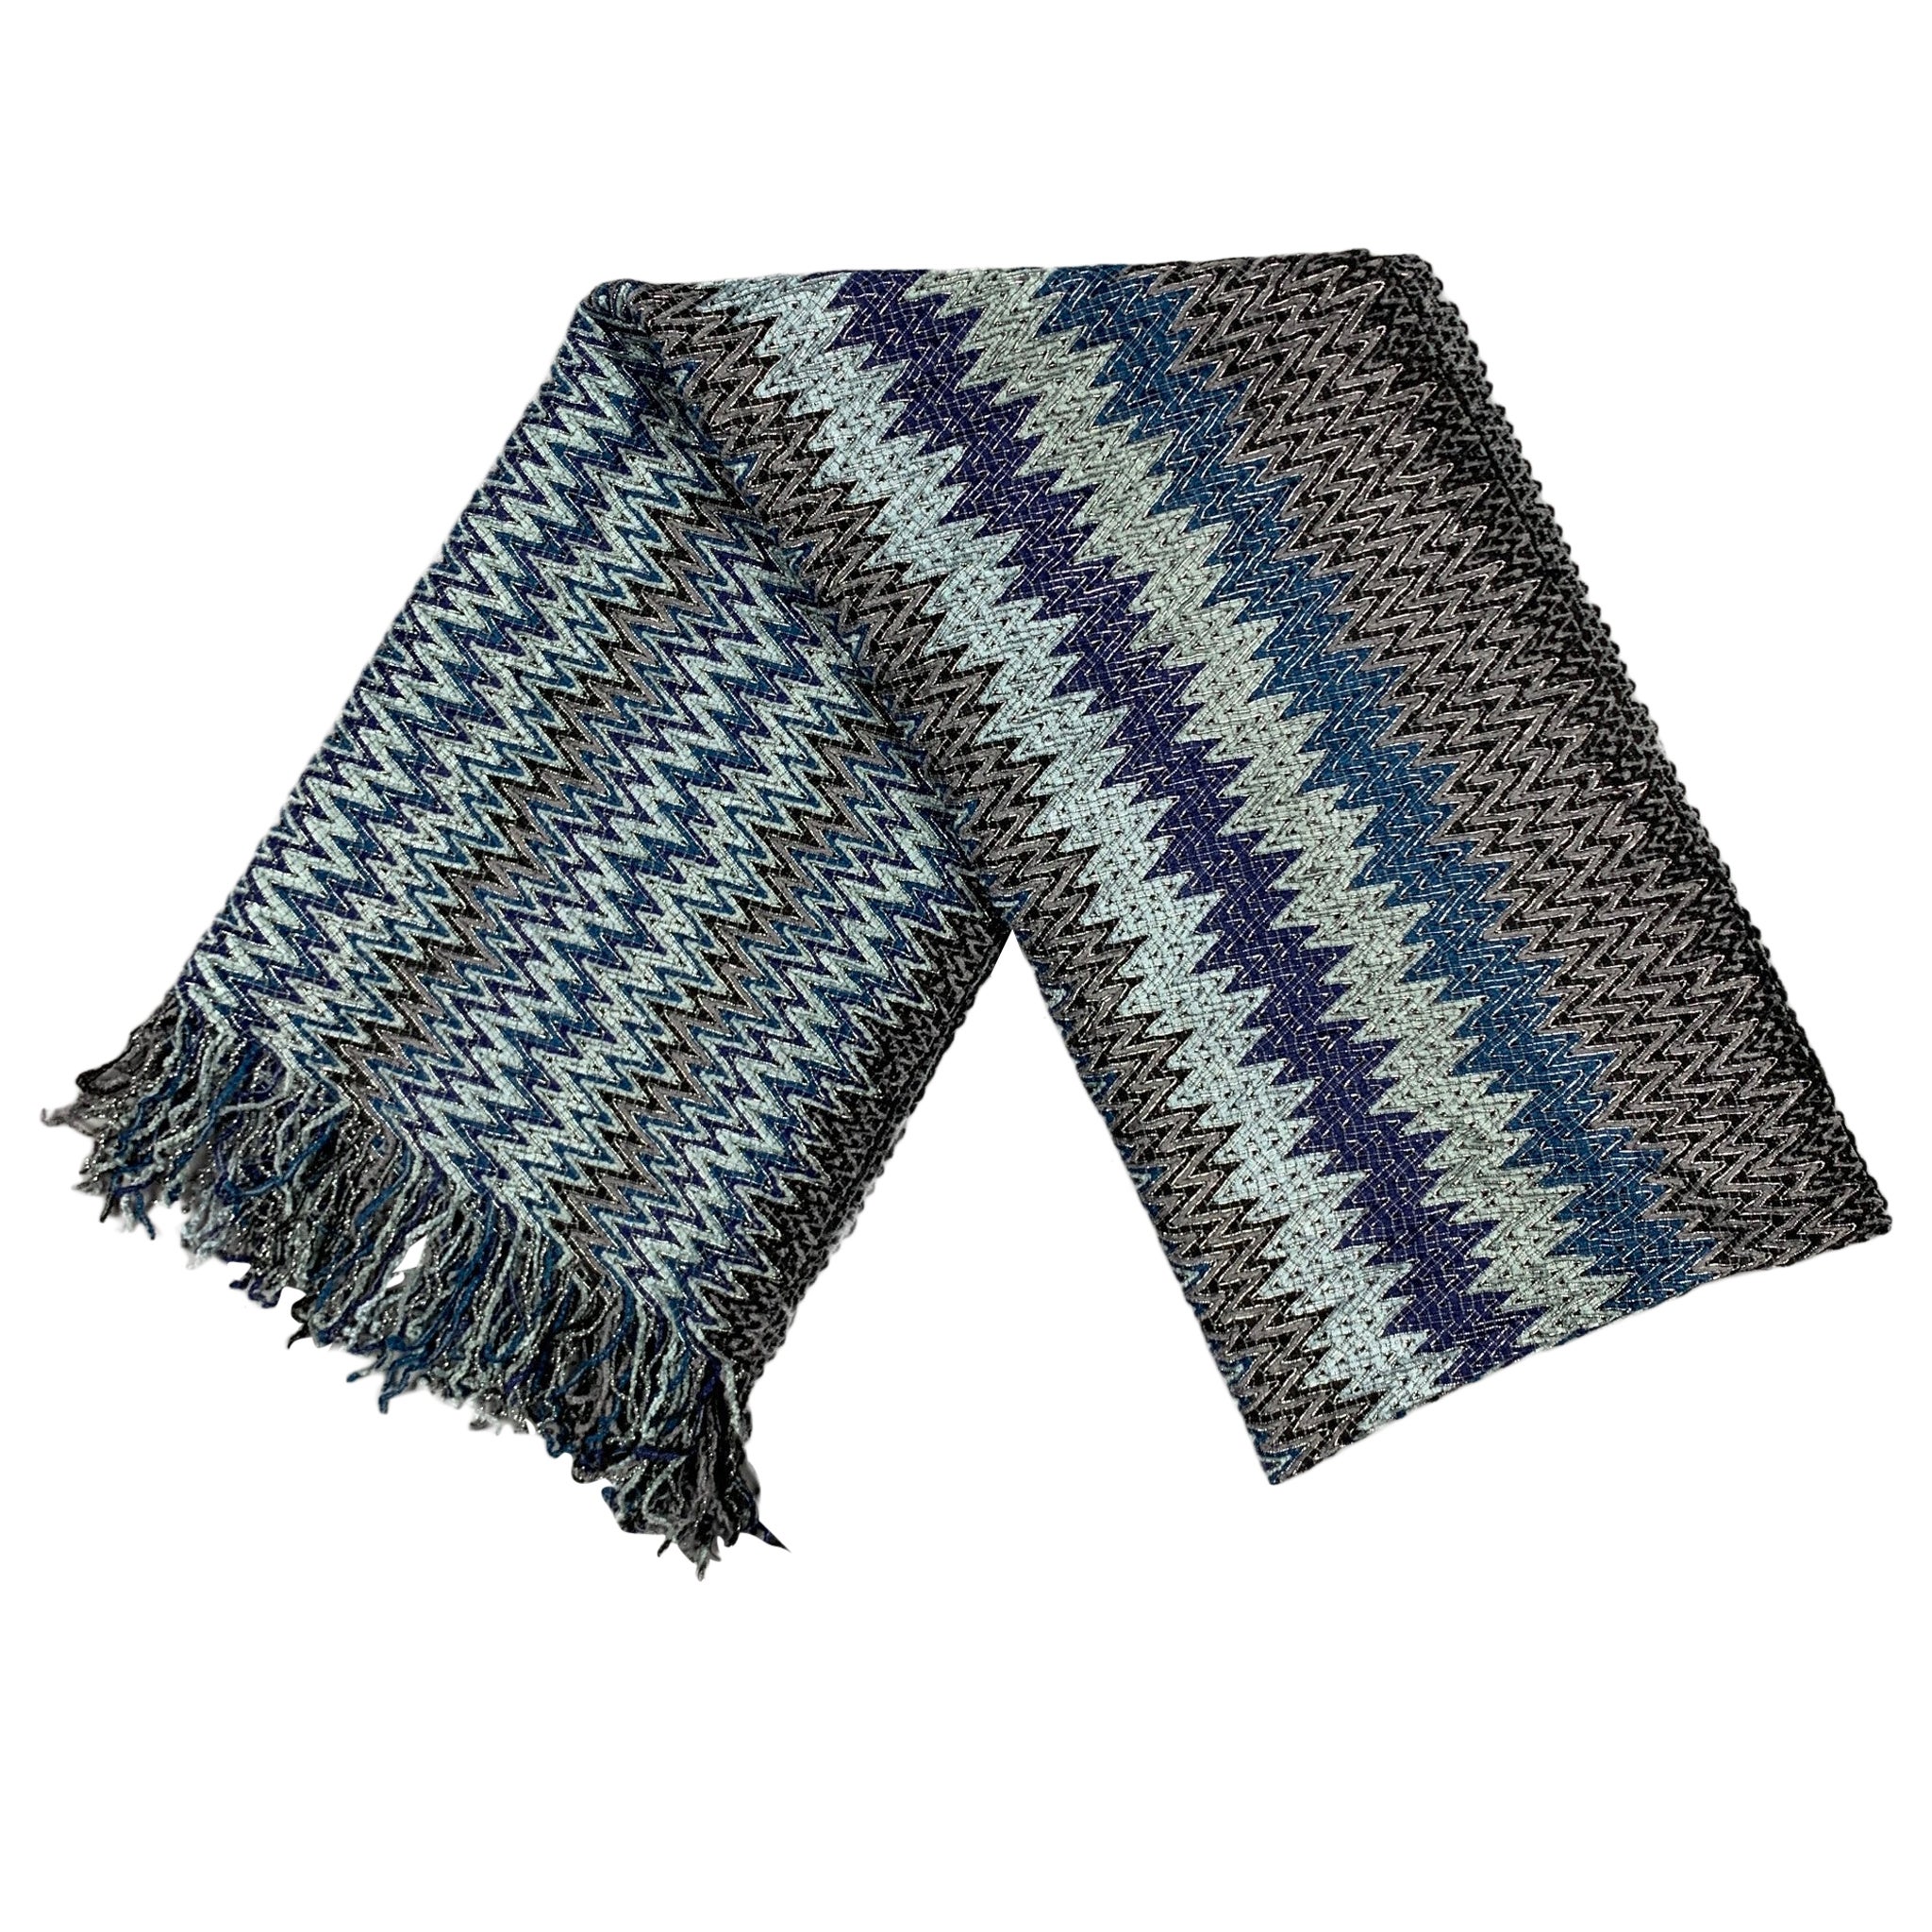 MISSONI WAVES MULTICOLOR WOOL AND ACRYLIC FRINGED  SCARF MADE IN ITALY BNWT